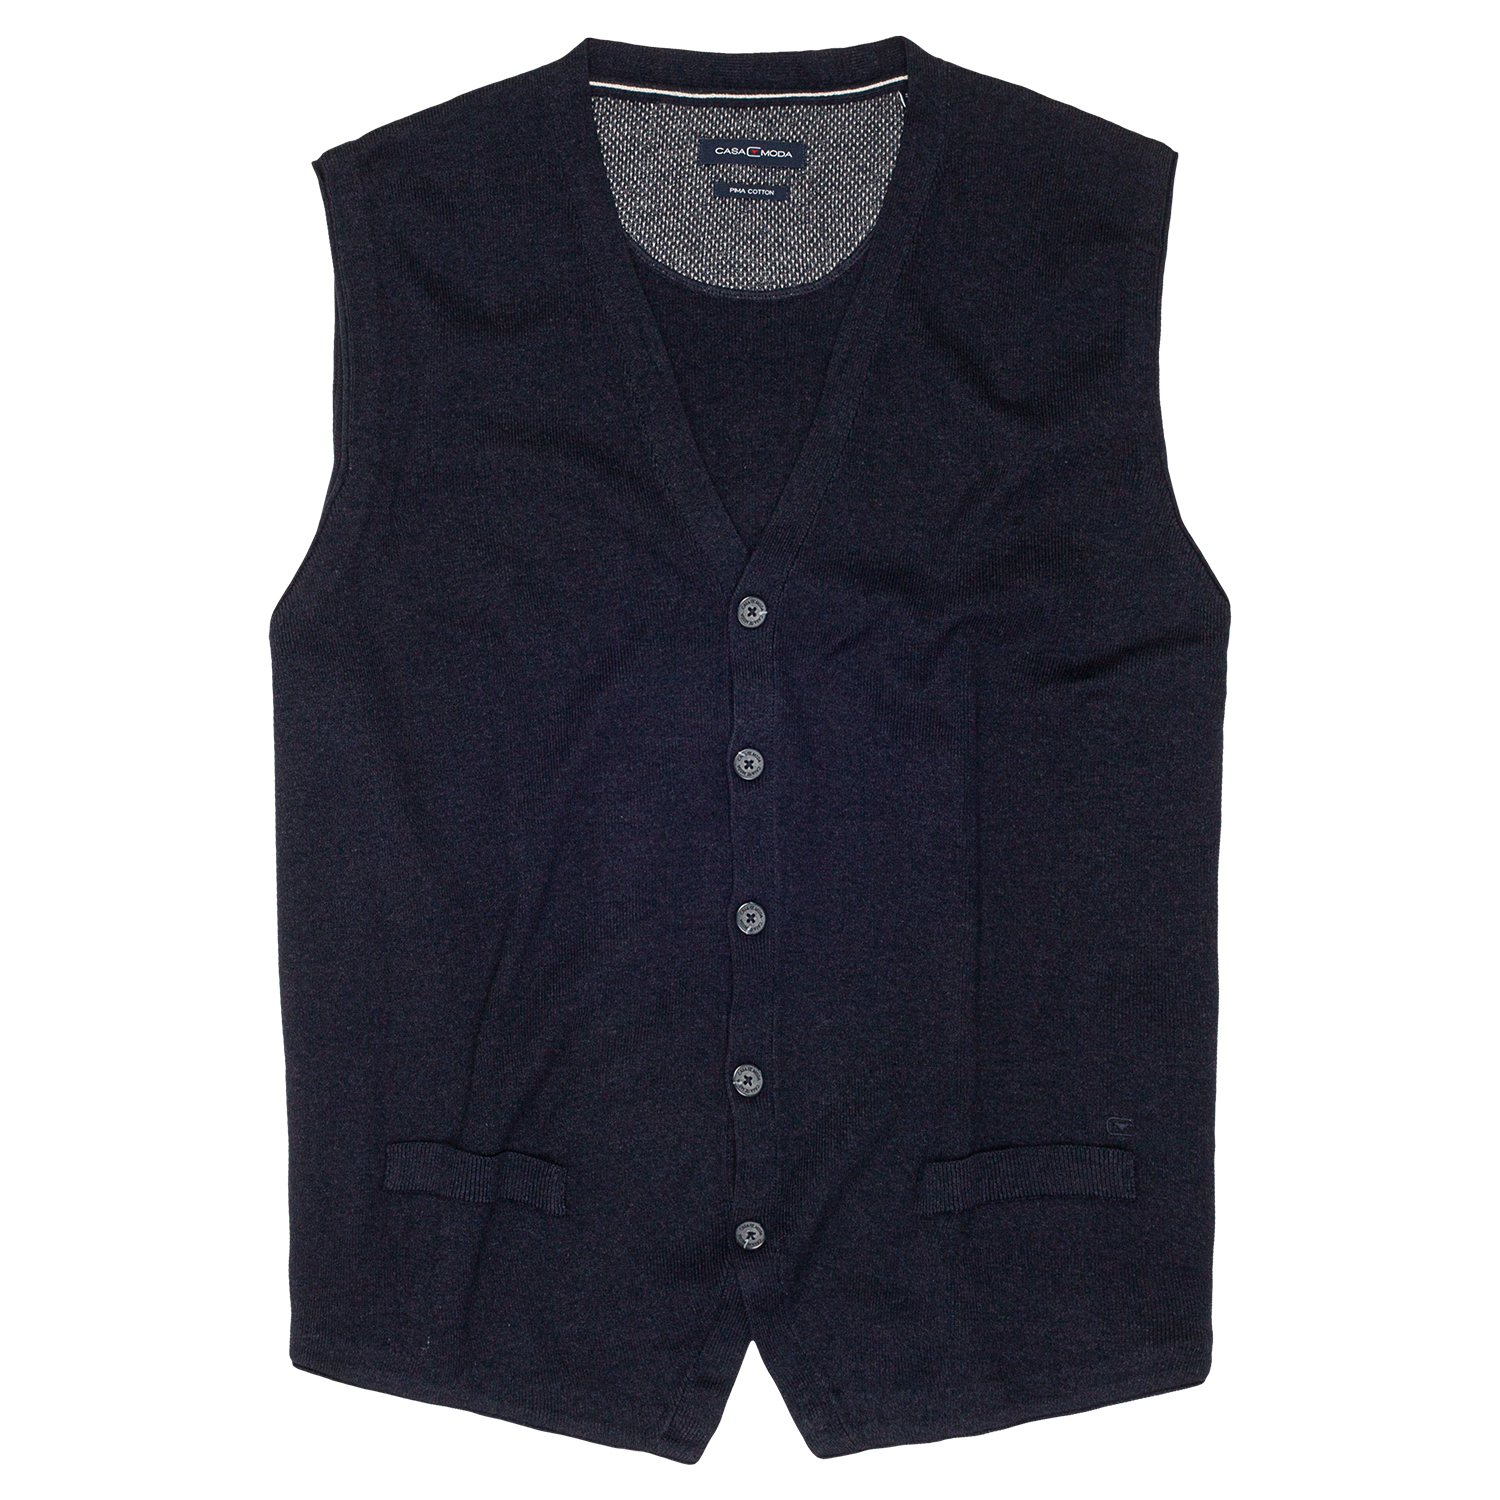 Casa Moda men's knitted vest without sleeves in dark blue up to oversize 6XL